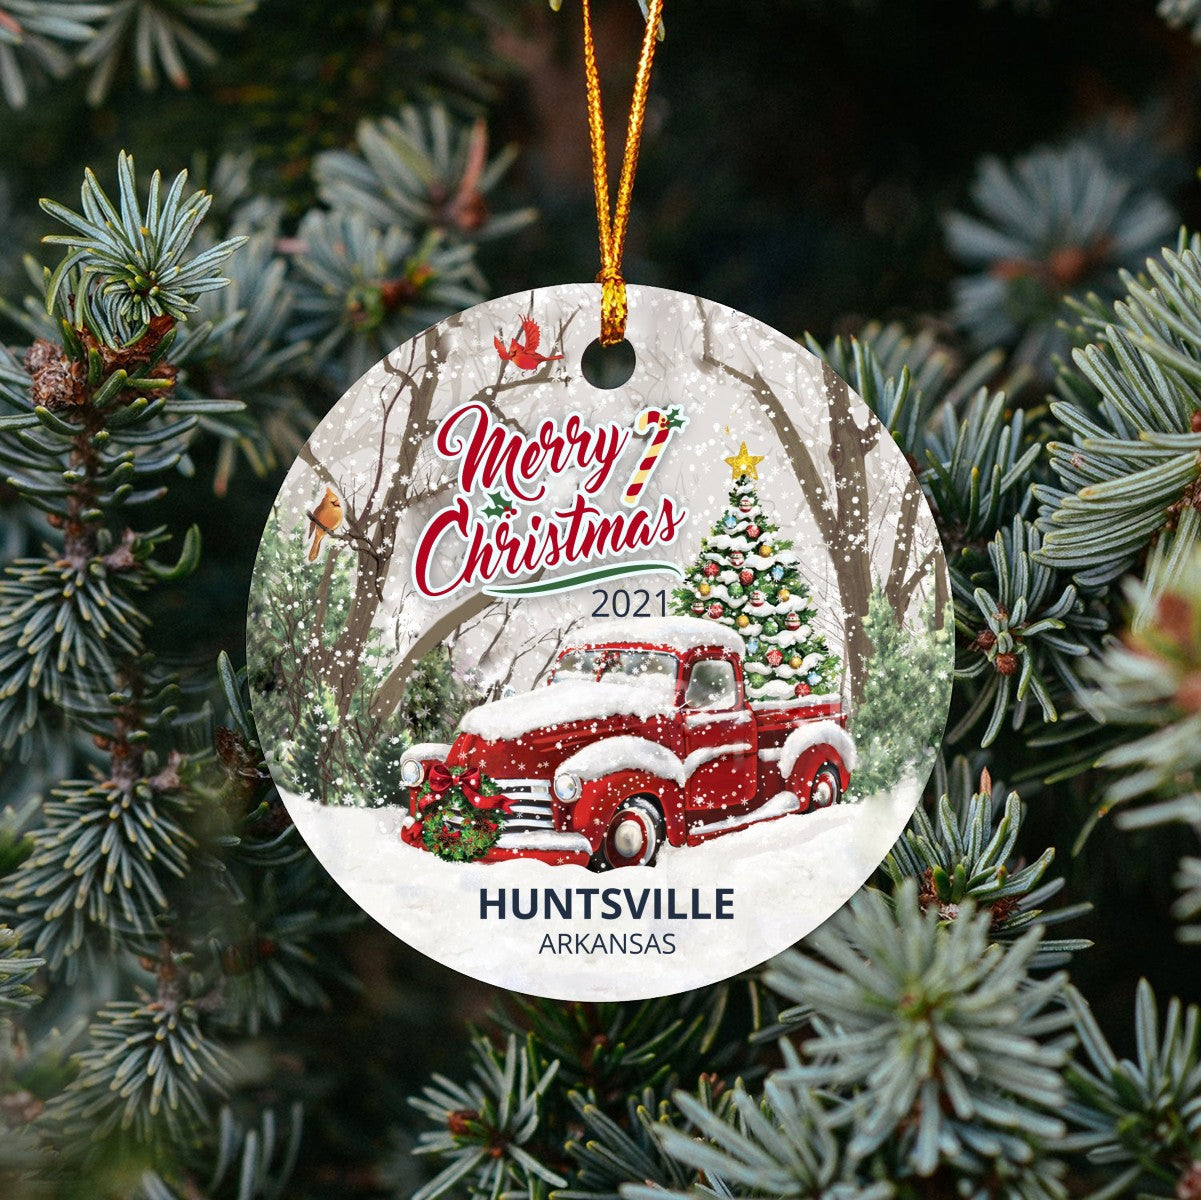 Christmas Tree Ornaments Huntsville - Ornament With Name City, State Huntsville Arkansas AR Ornament - Red Truck Xmas Ornaments 3'' Plastic Gift For Family, Friend And Housewarming